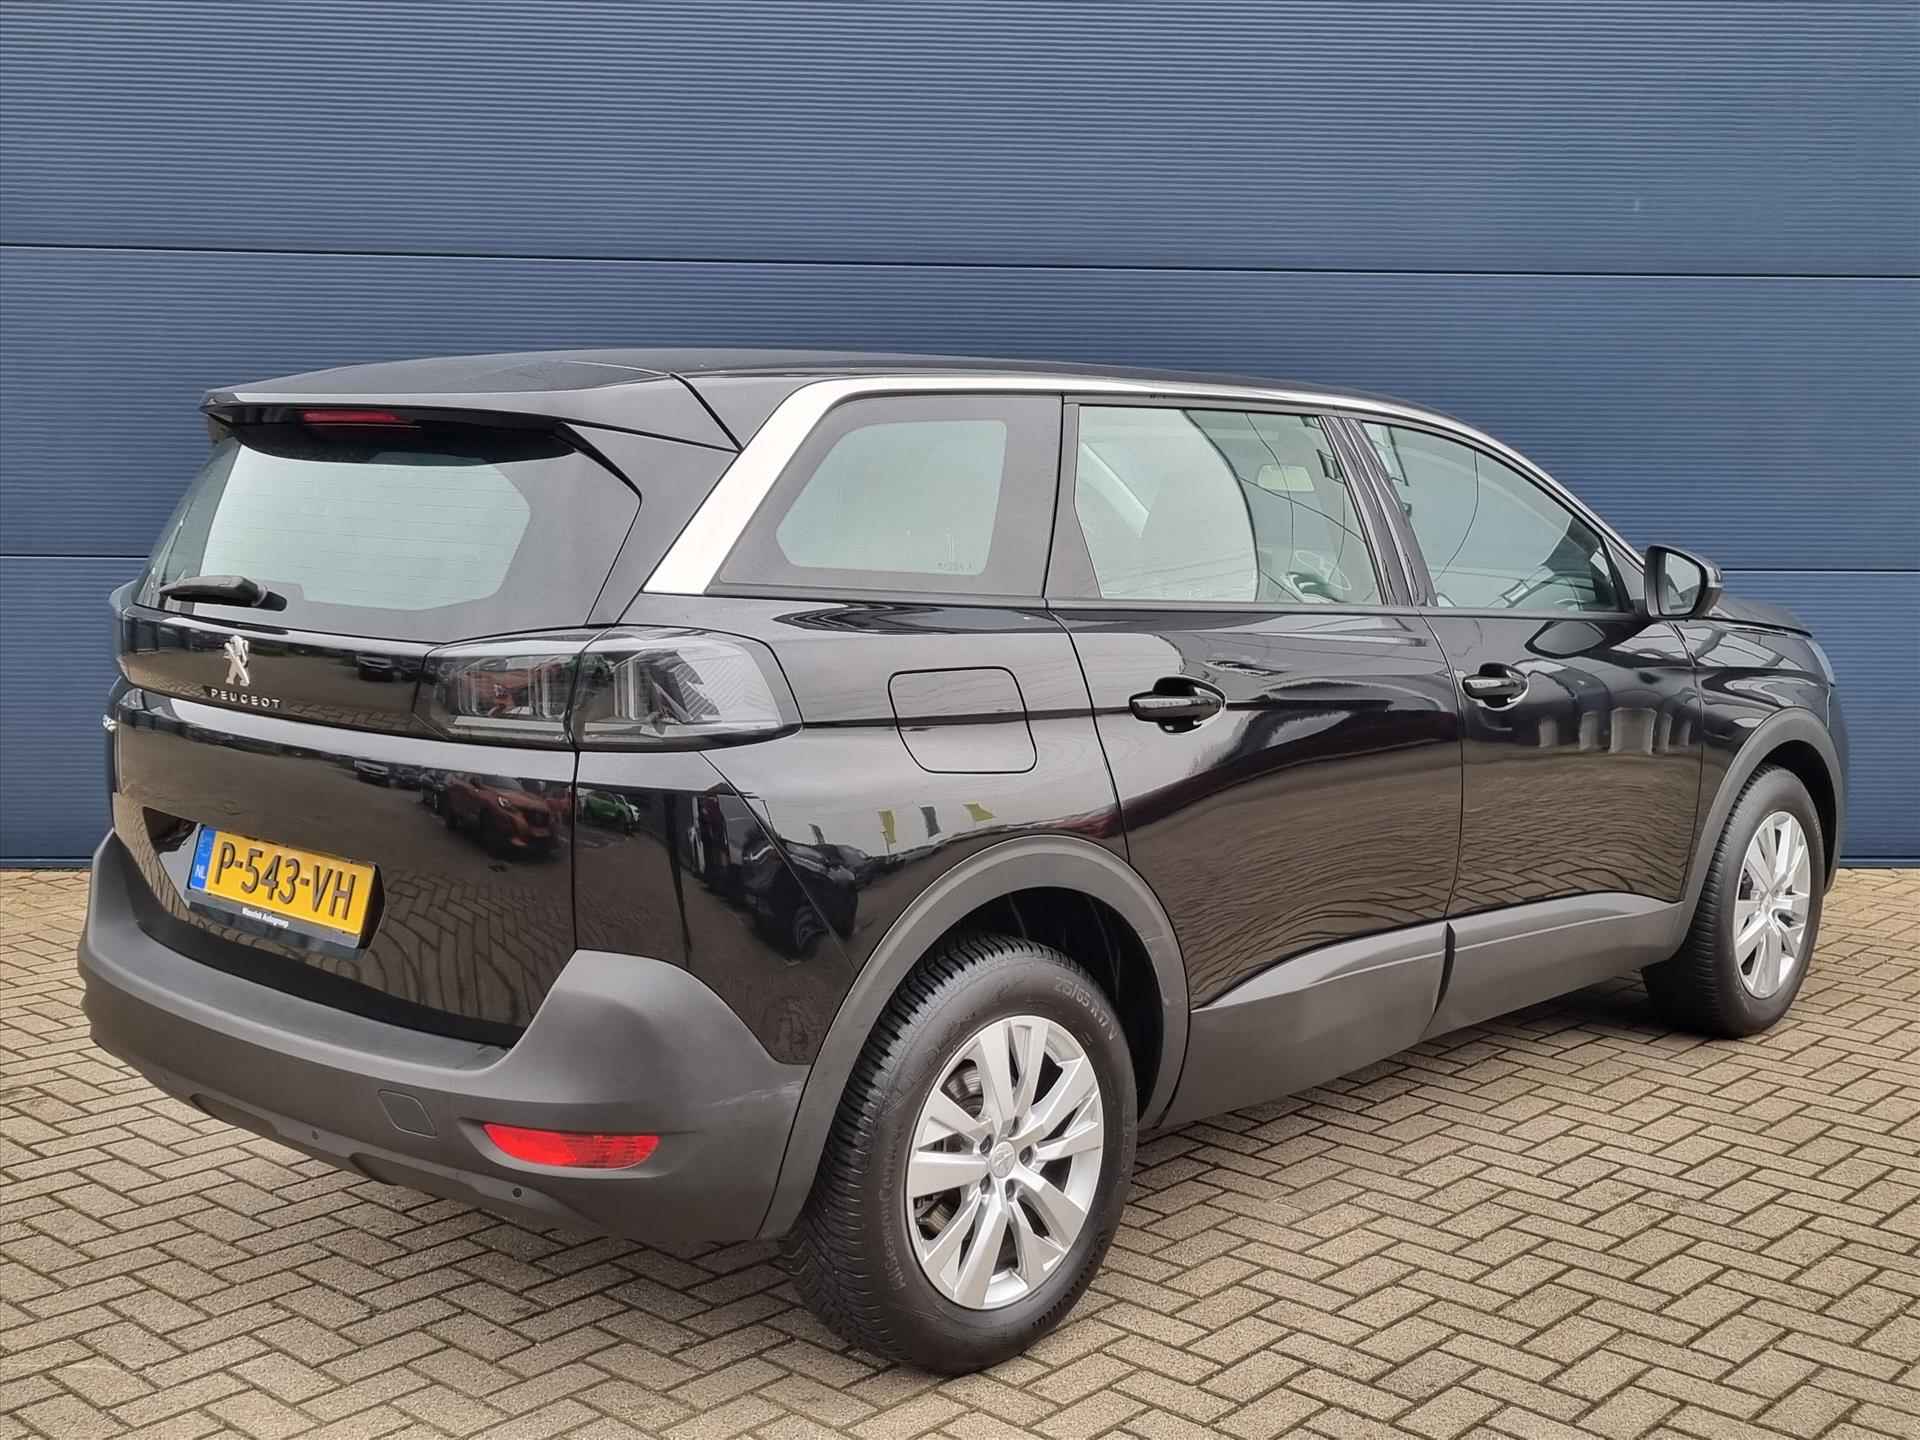 PEUGEOT 5008 1.2 Turbo 130pk Active Pack Business Automaat | Navigatie | Camera | All Season Banden | 7-Persoons | Climate Control | Parkeersensoren V+A | - 5/46